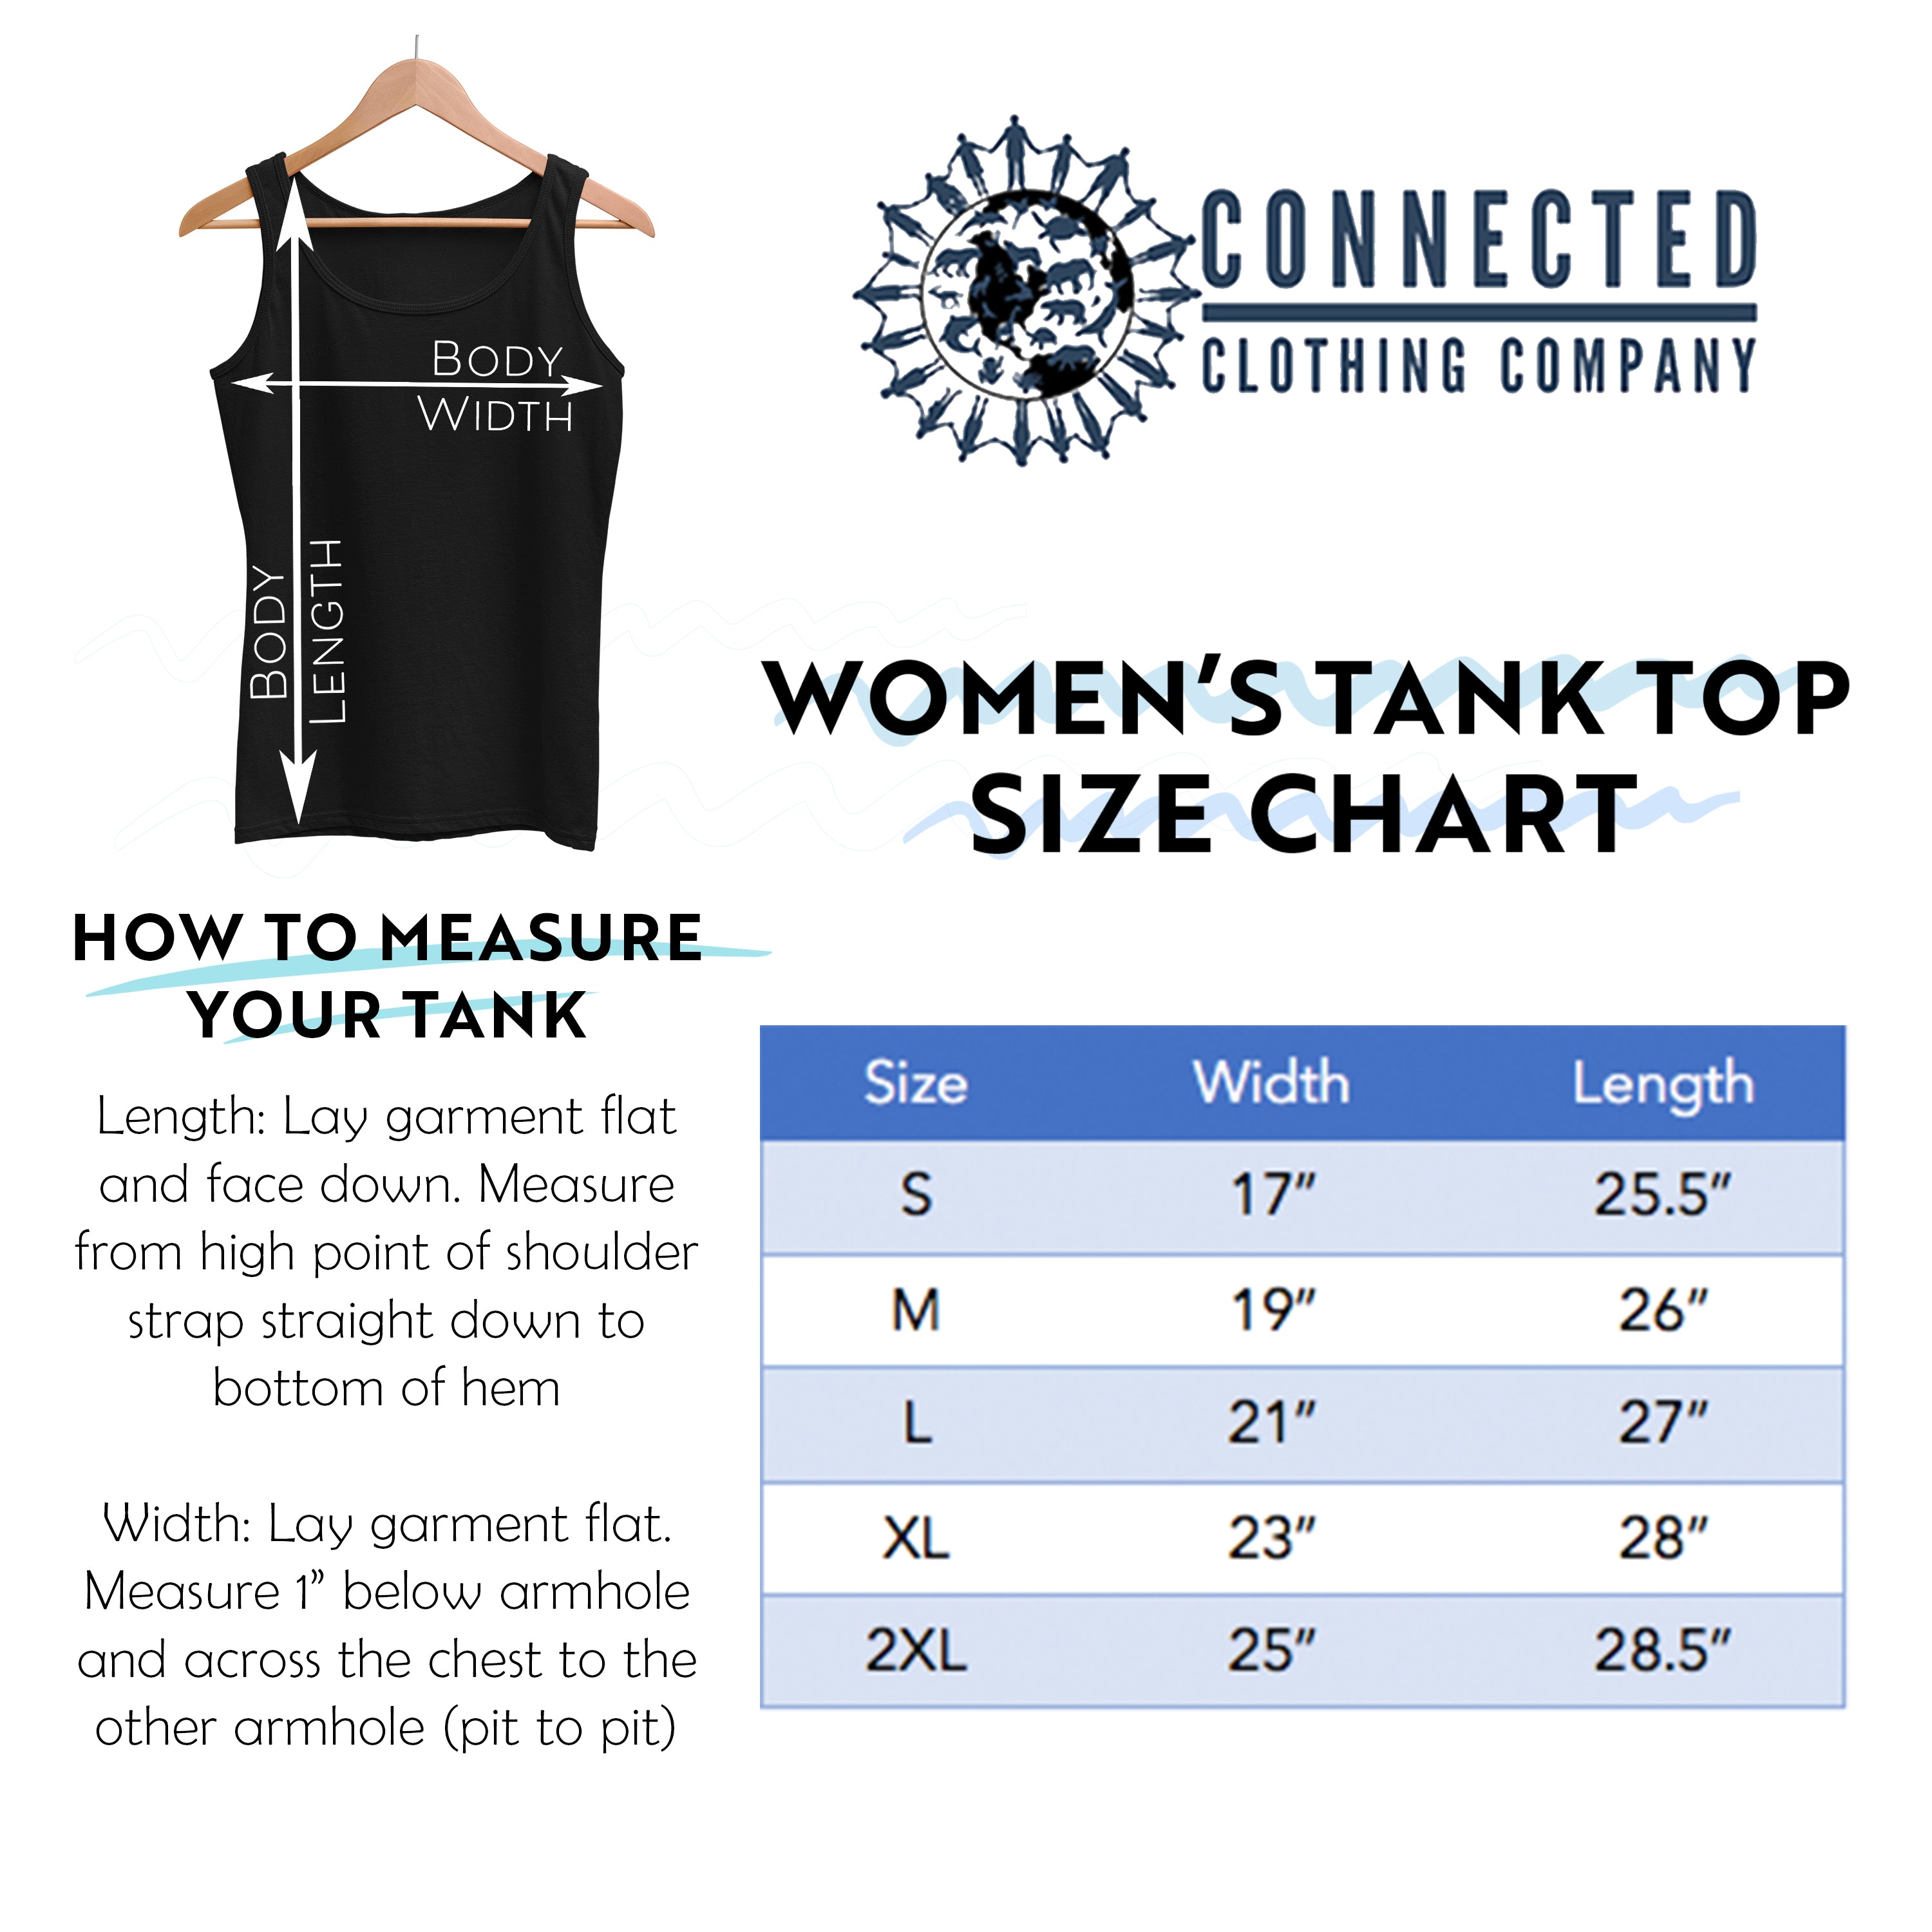 Women's Relaxed Tank Top Size Chart - sharonkornman - Ethically and Sustainably Made - 10% donated to Mission Blue ocean conservation